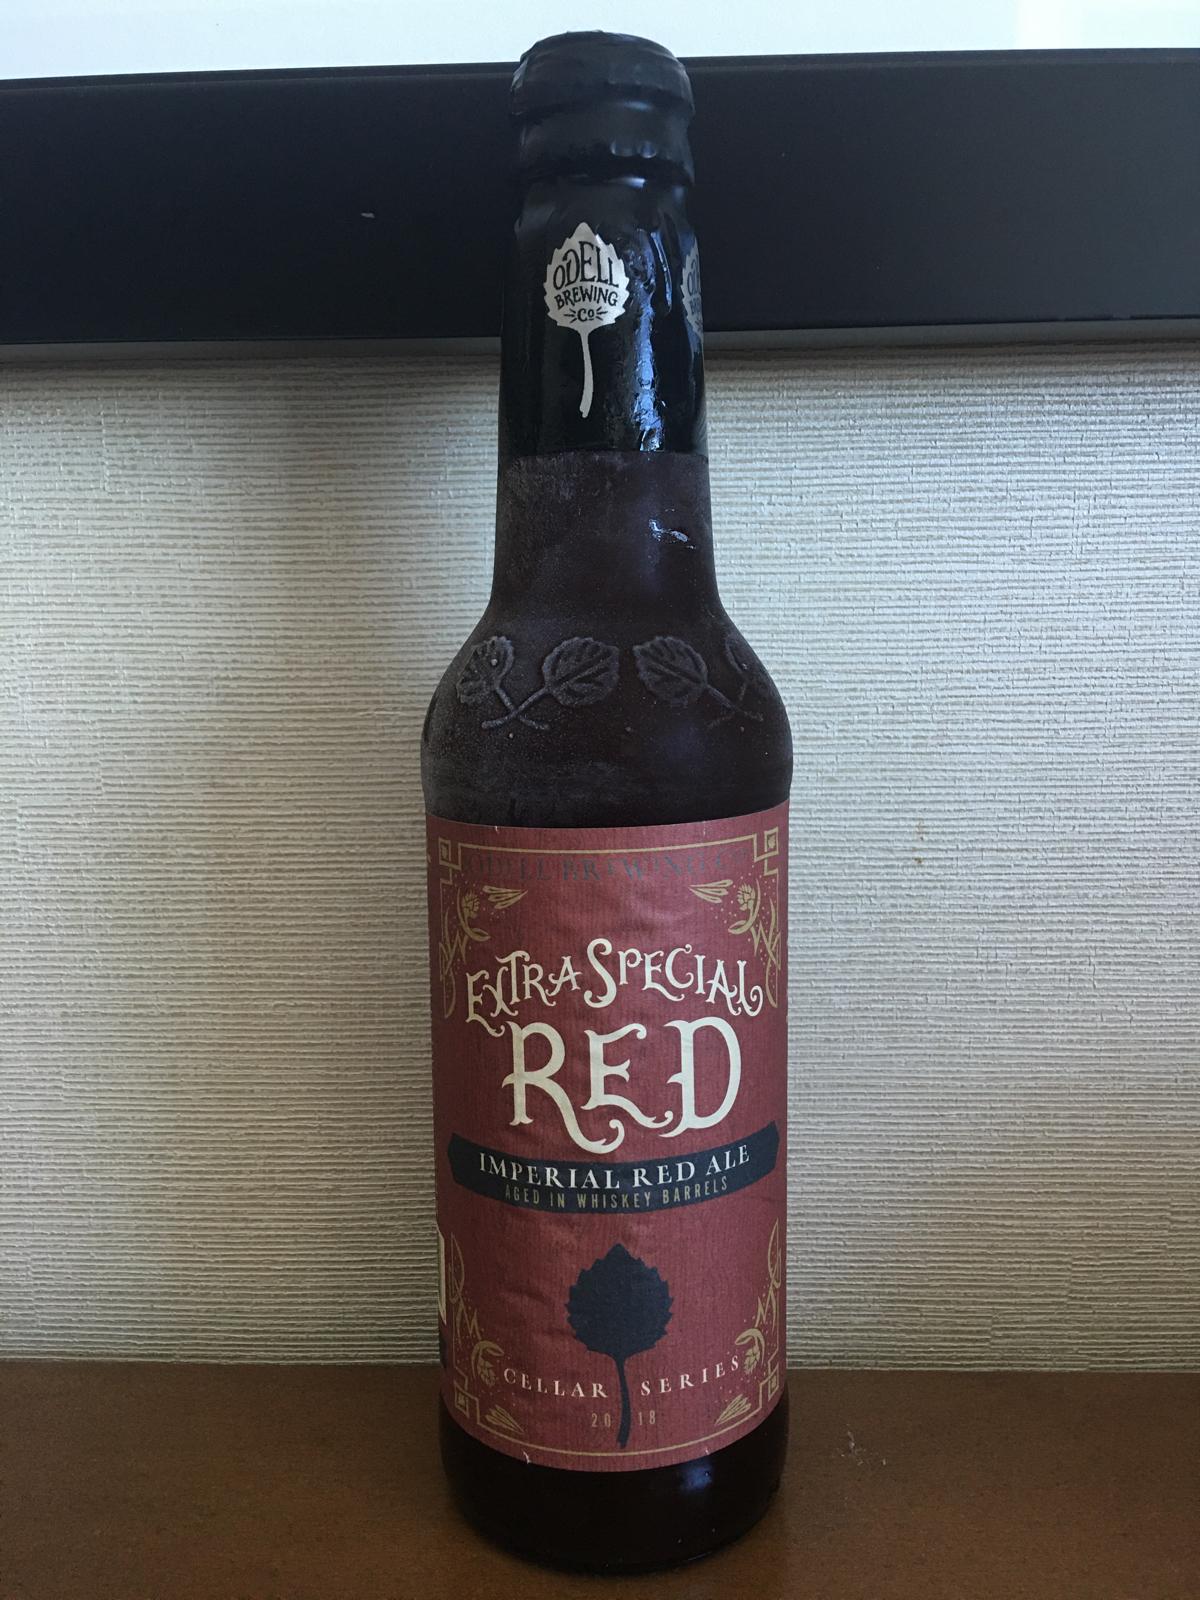 Cellar Series: Extra Special Red (2018)